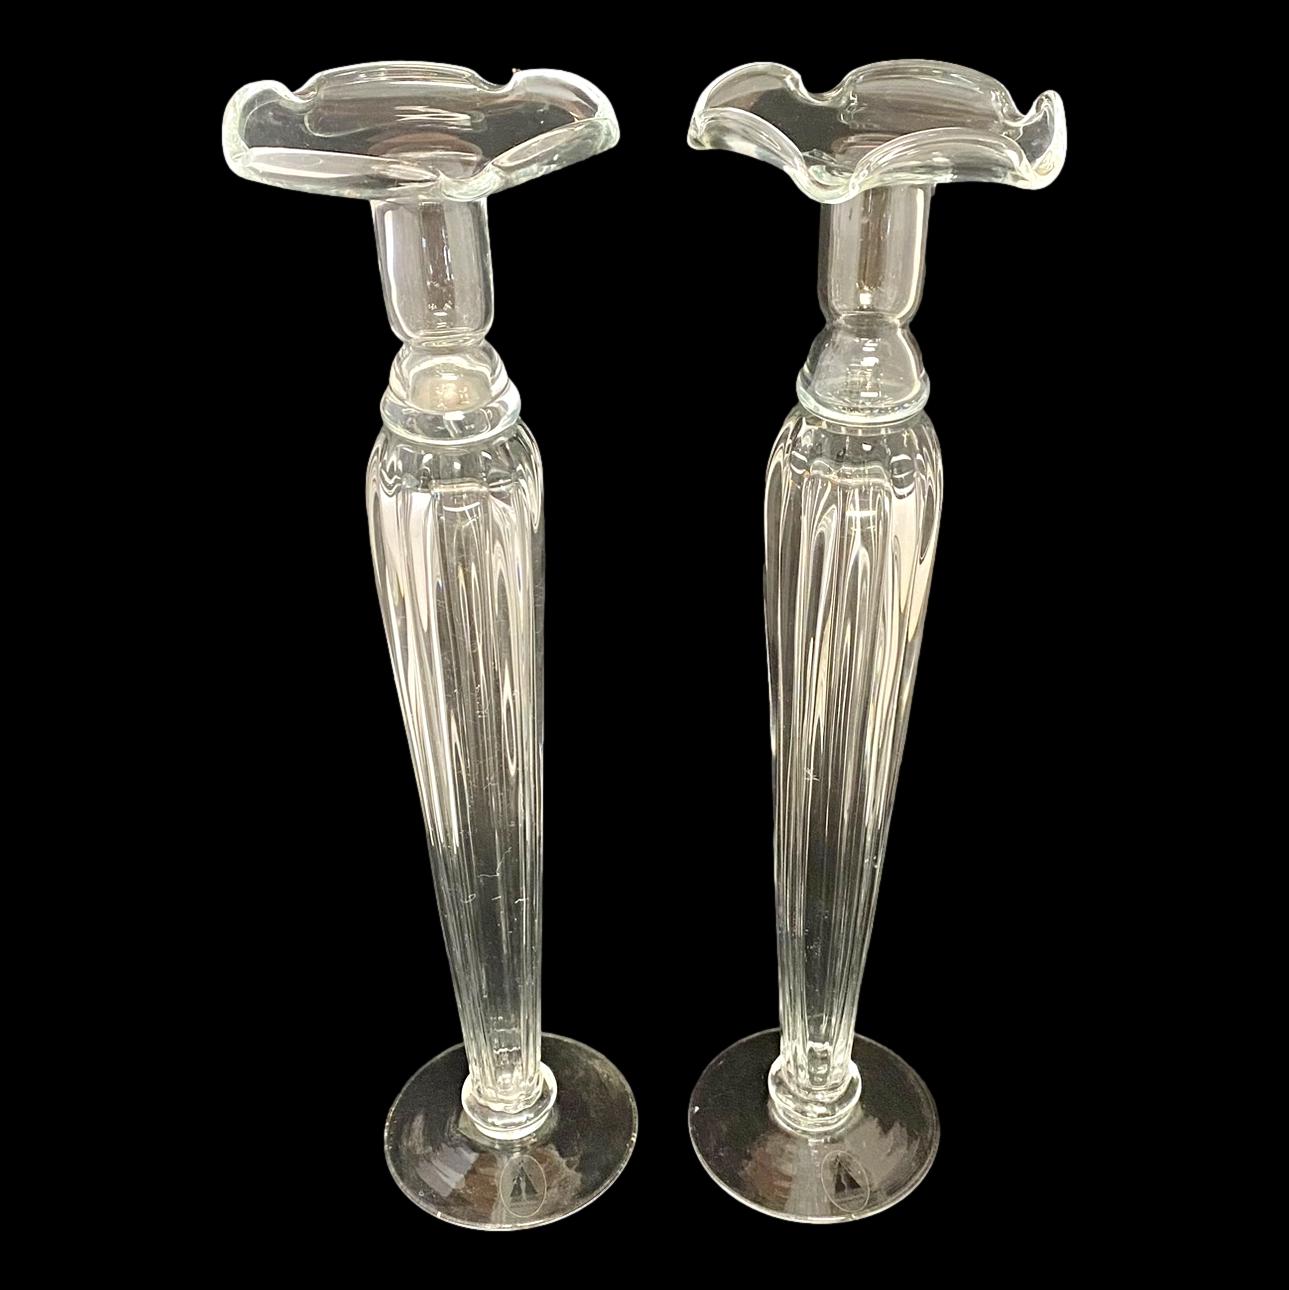 Pair of Glass Candleholders